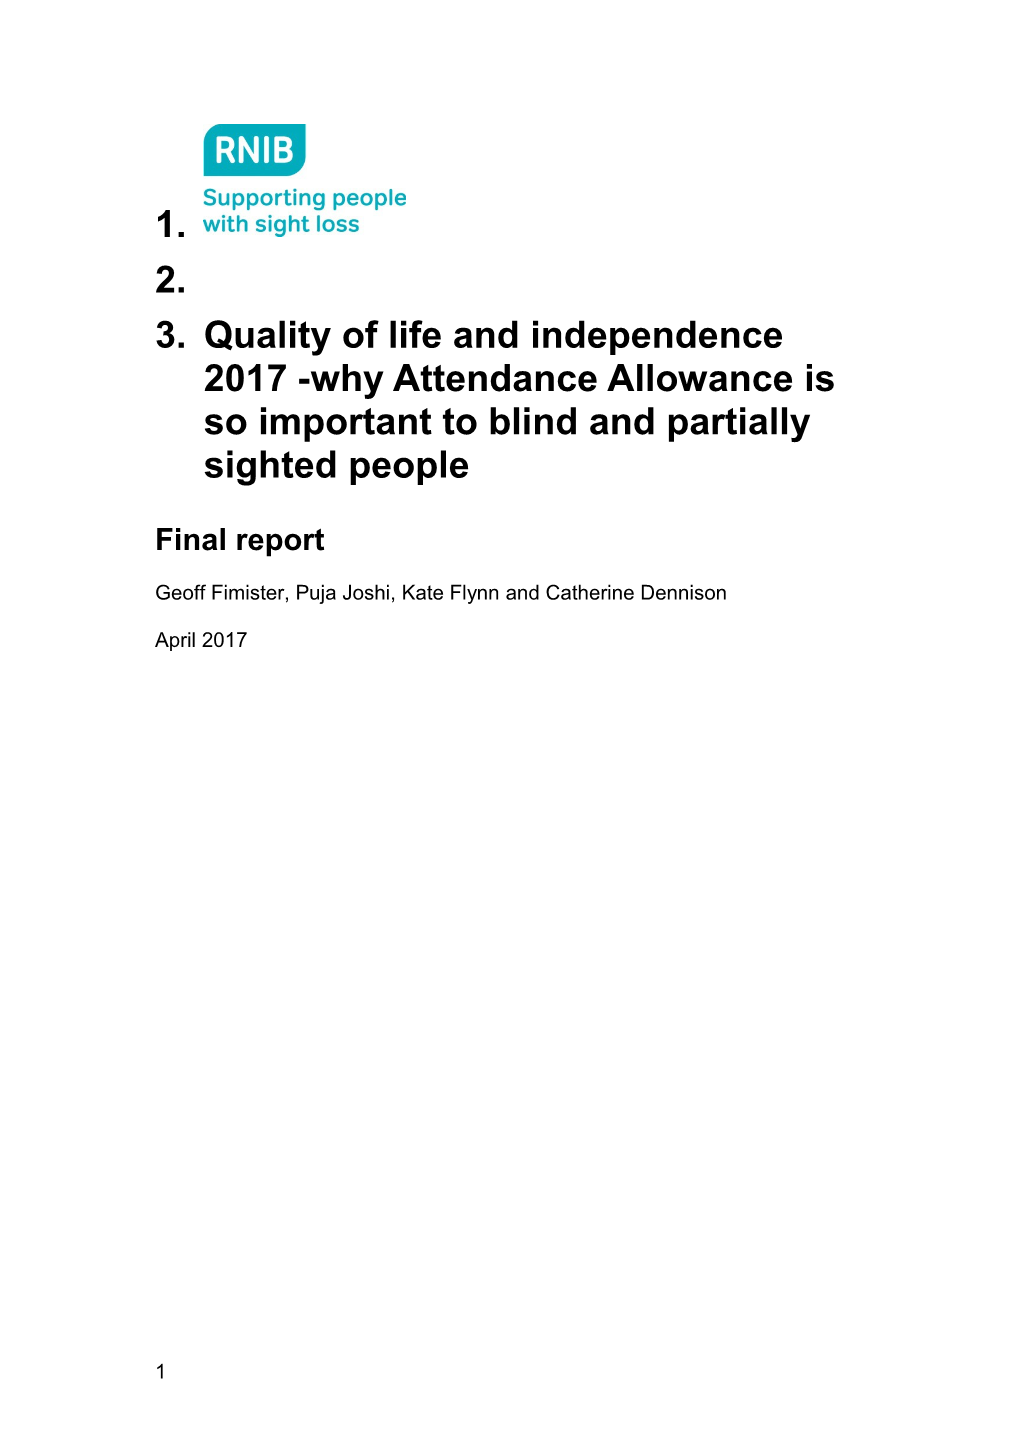 Quality of Life and Independence 2017 -Why Attendance Allowance Is So Important to Blind